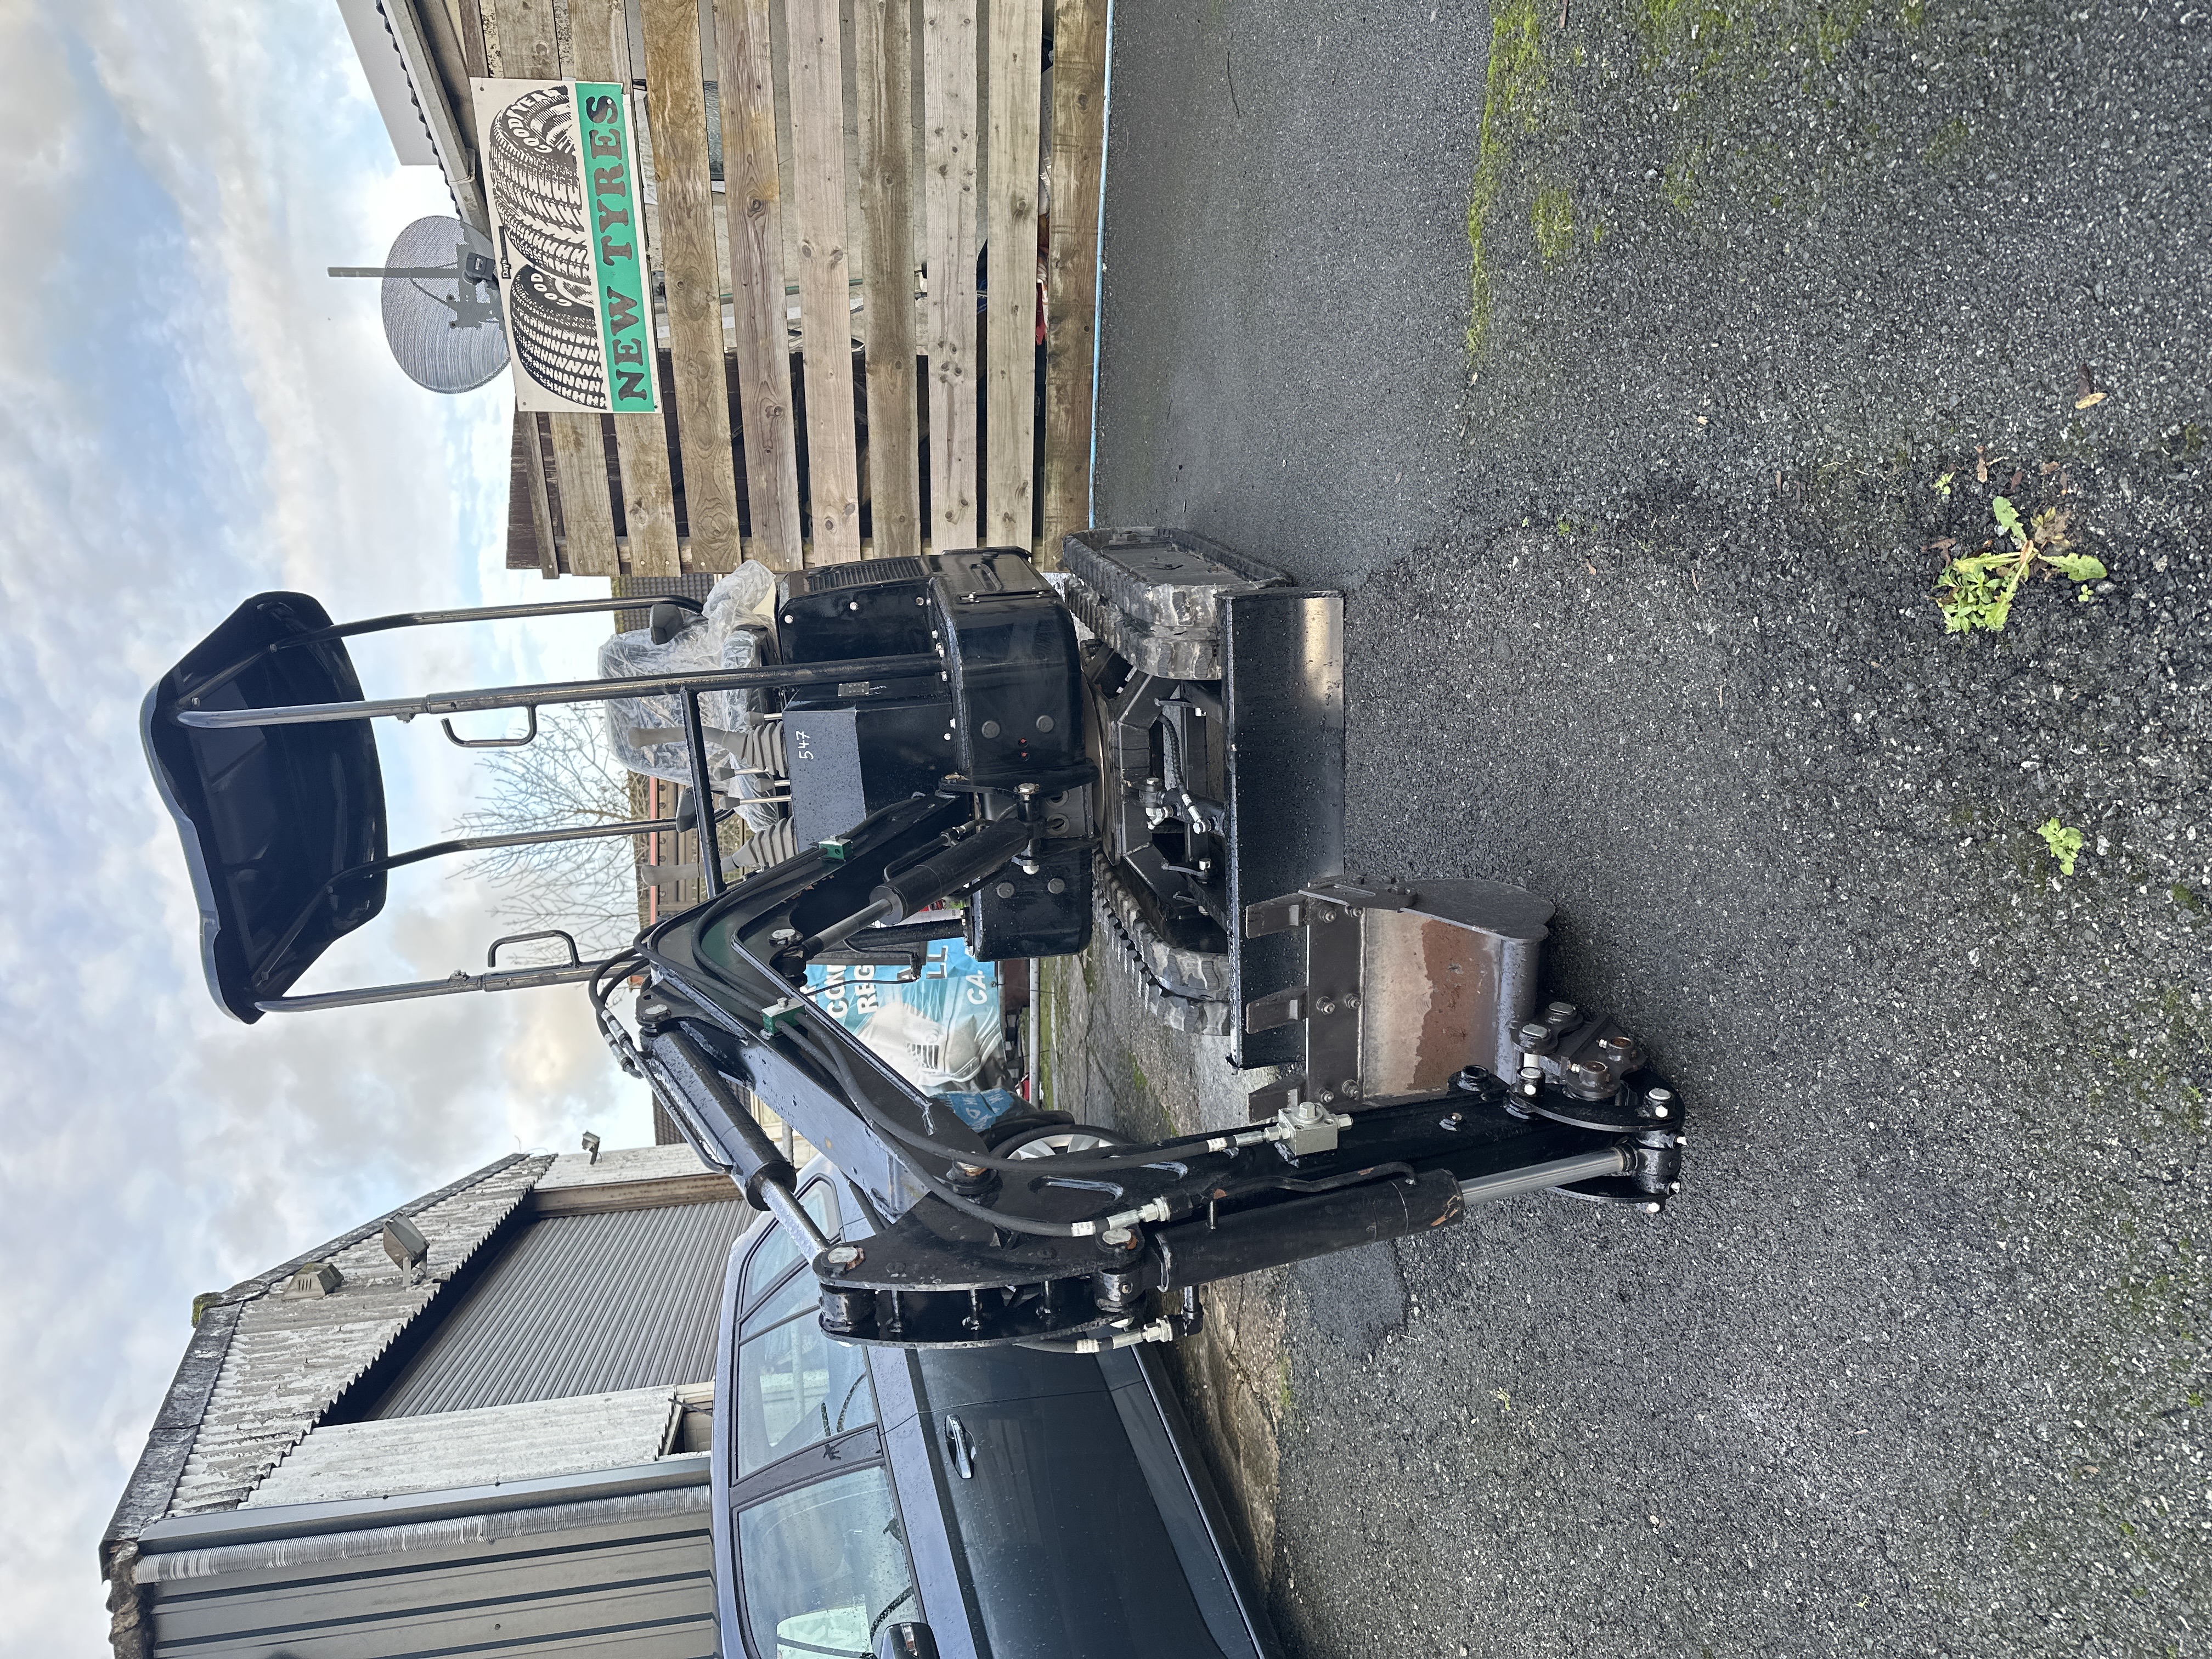  HARDLIFE XN12 MINI EXCAVATOR  for sale at Mike Howlin Motor Sales Pembrokeshire